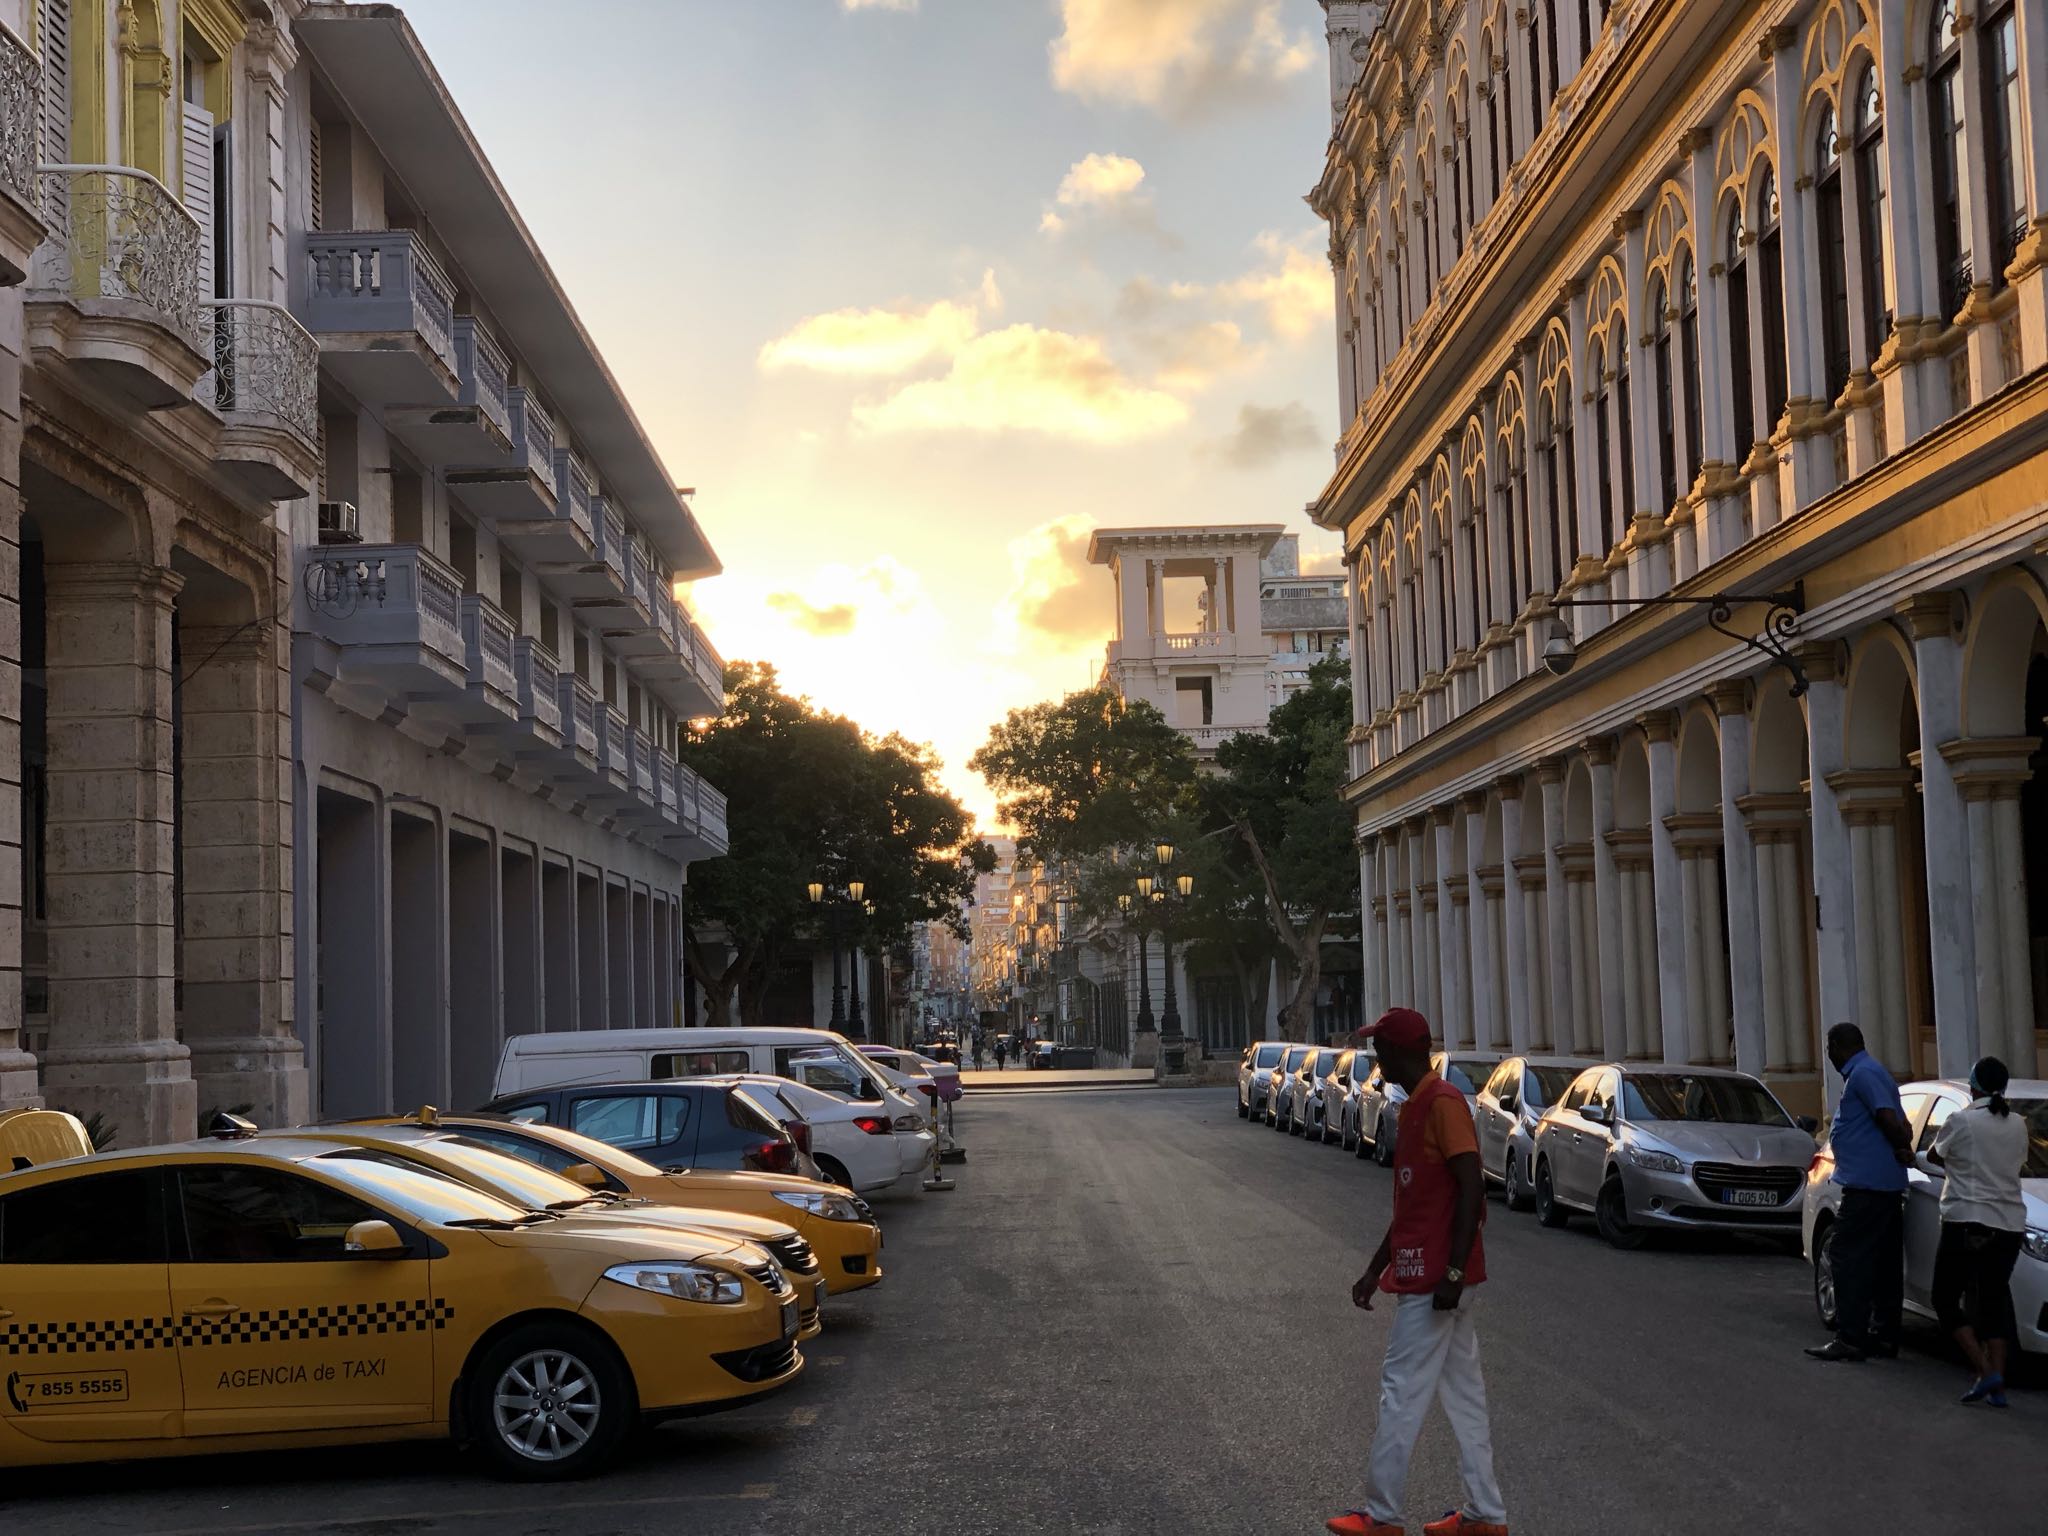 Photo 200 of 221 from the album Highlights Cuba 2019.